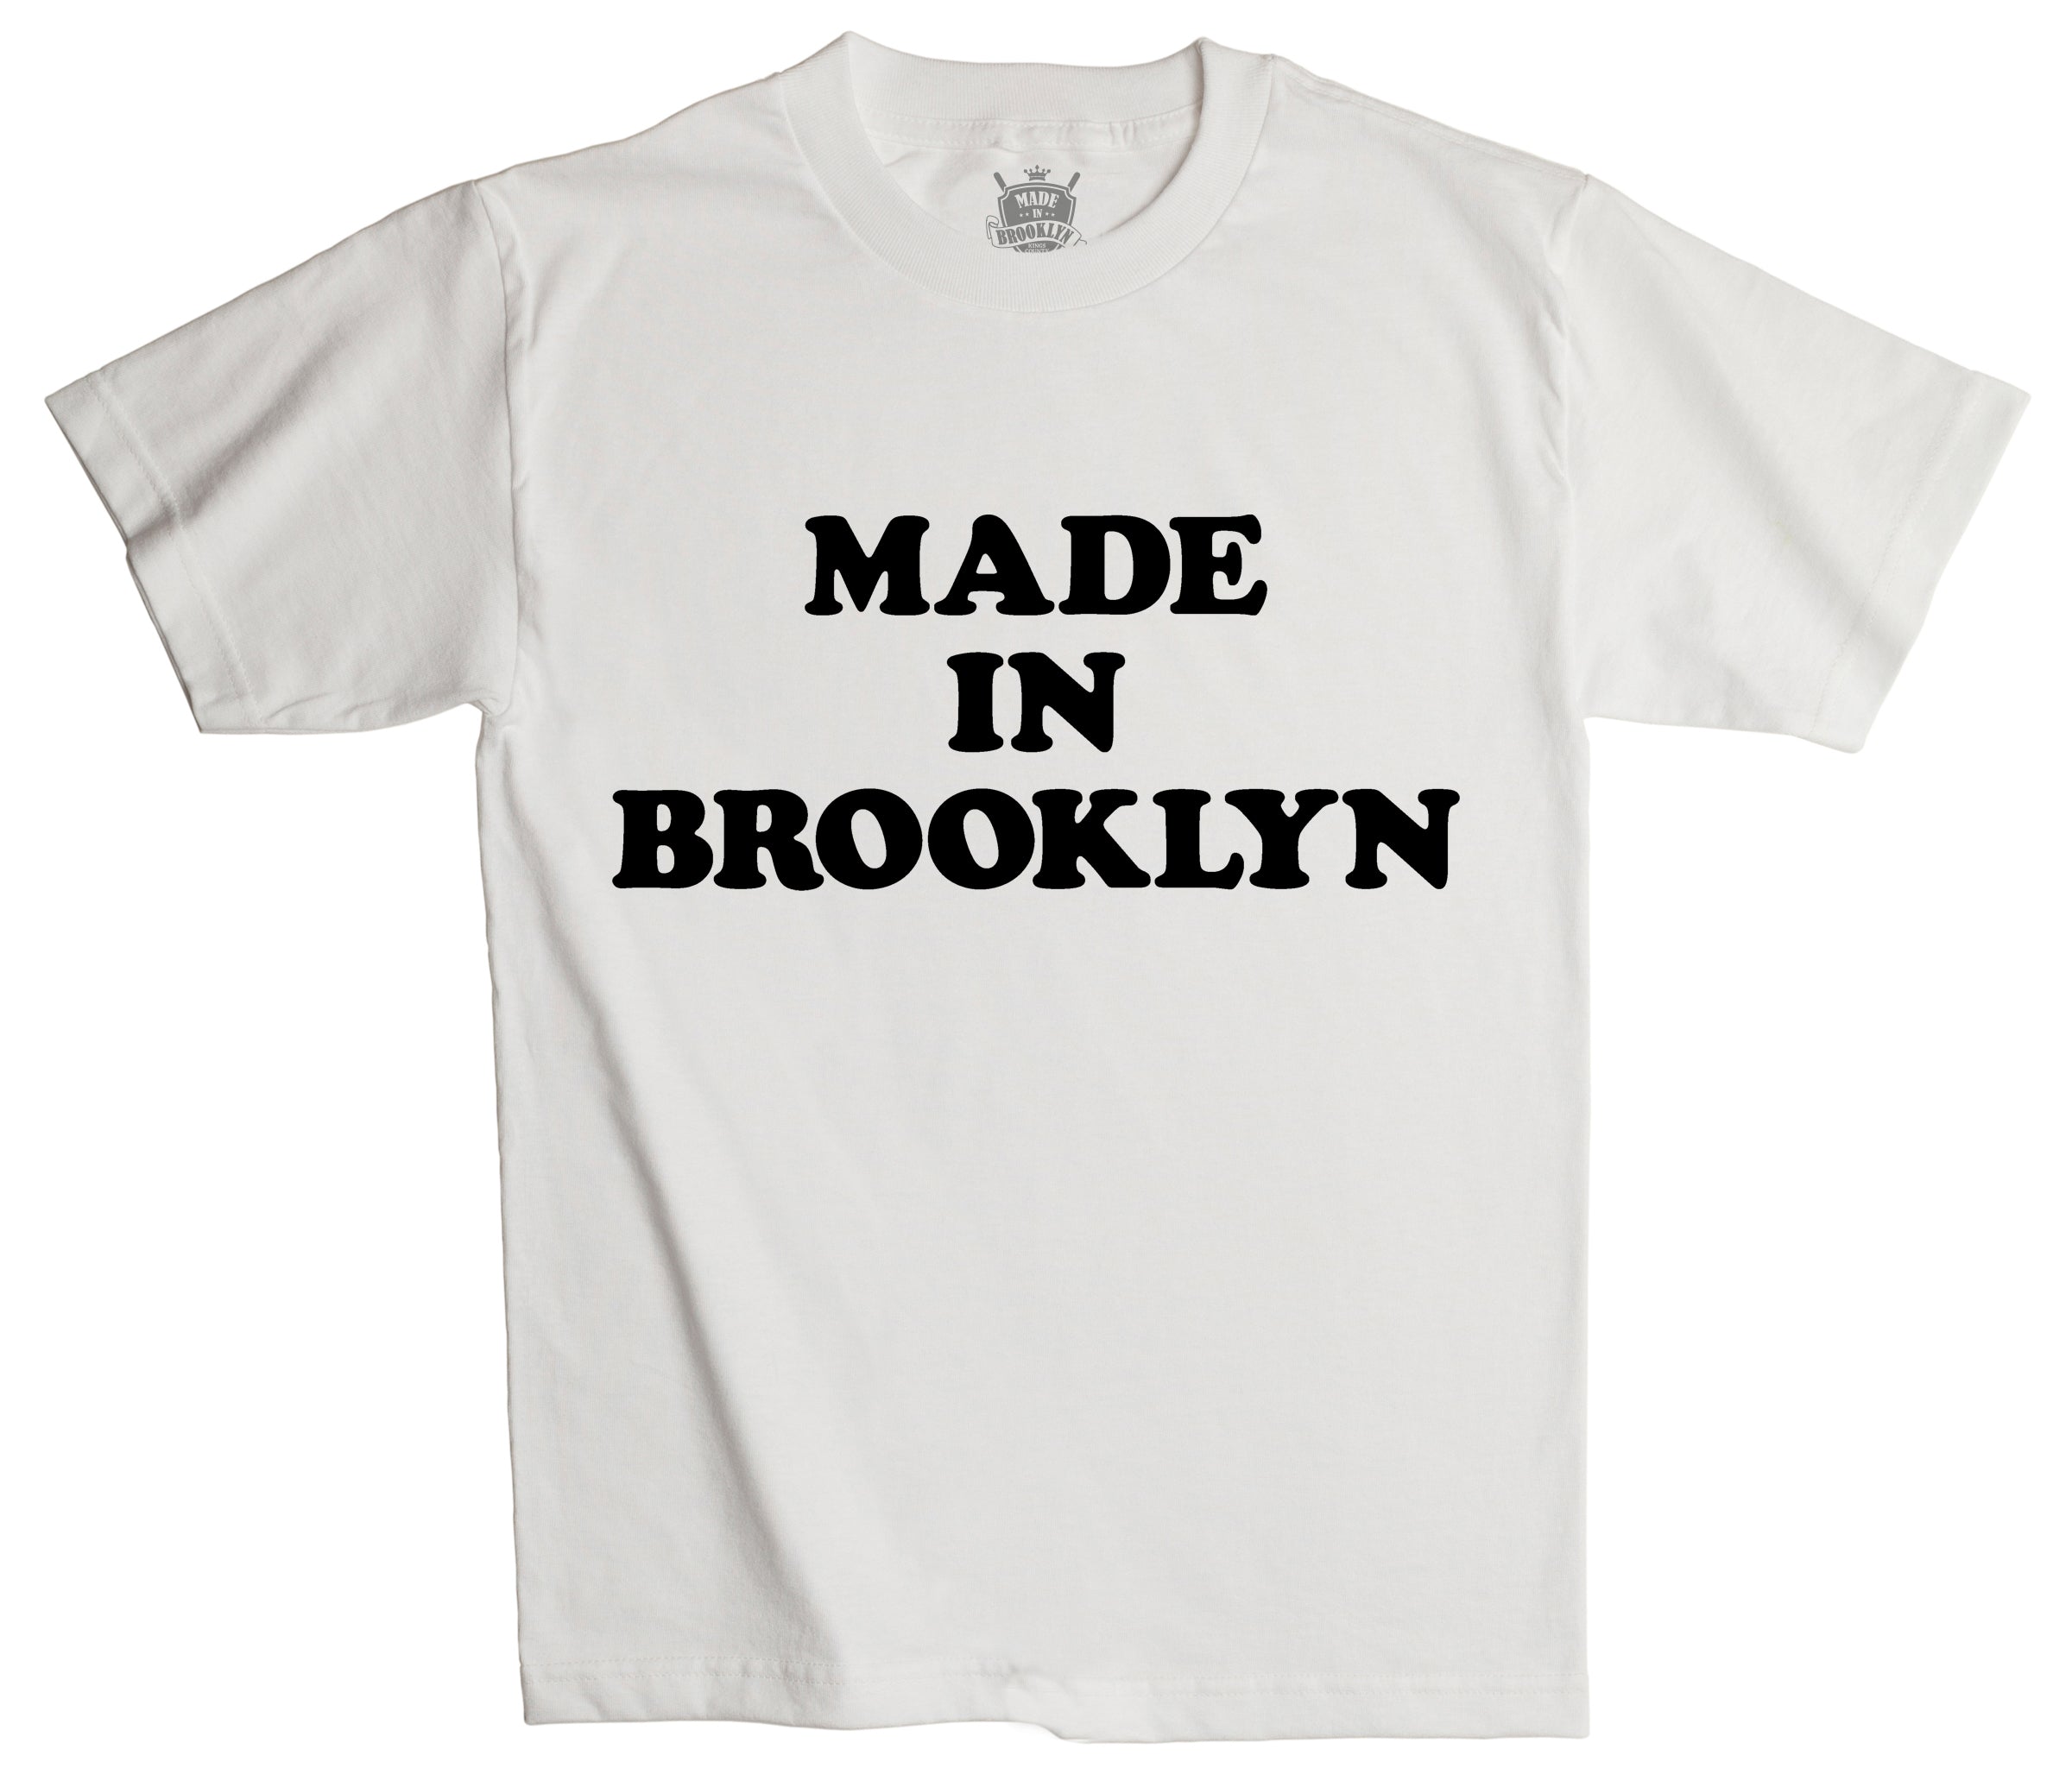 MADE IN BROOKLYN Old School Puff Letter Tee (white/black)